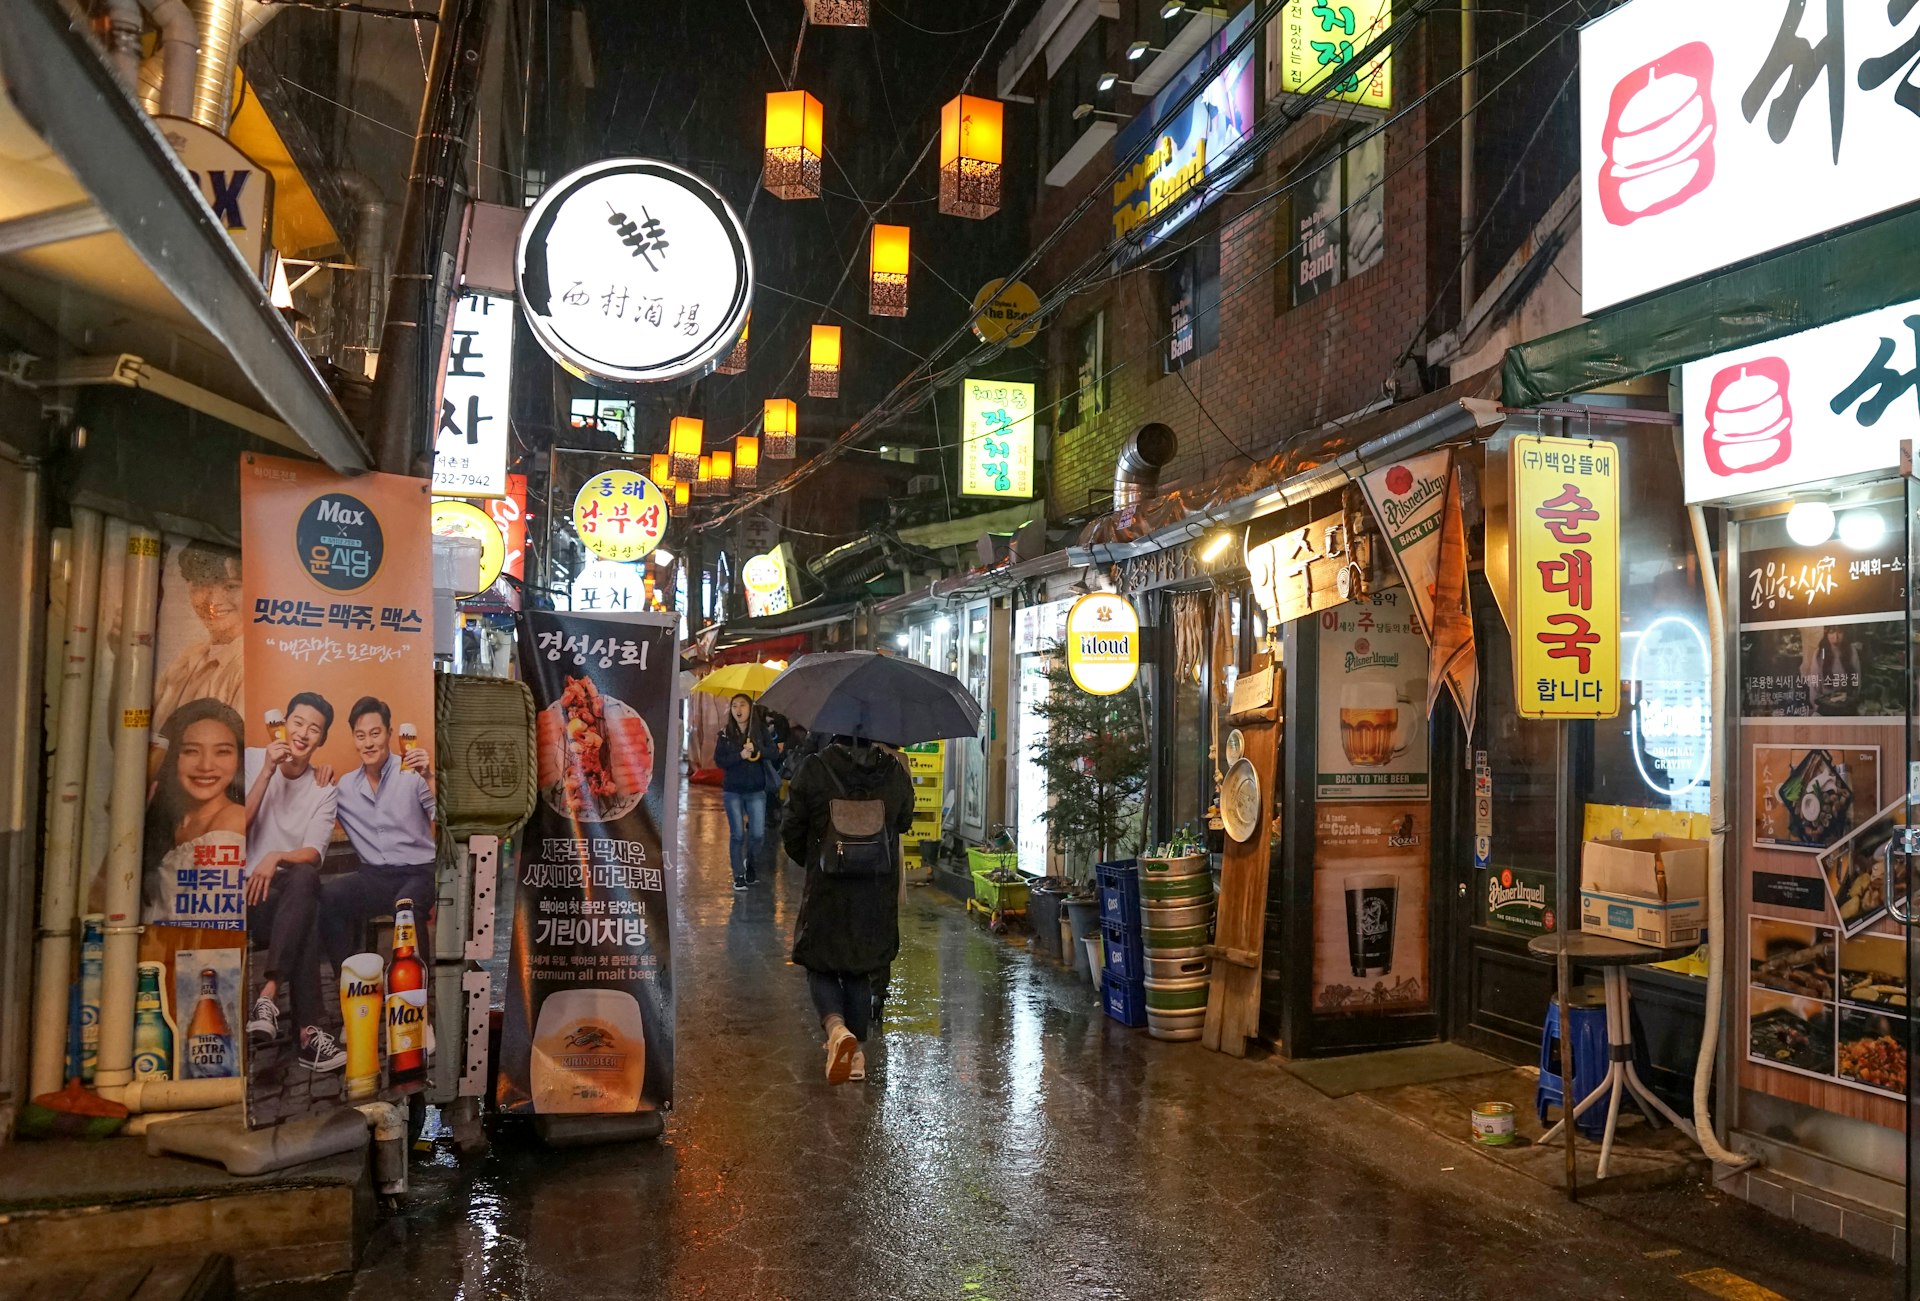 People walk under umbrellas by lit street signs on a rainy night in Tongin-dong, Seoul, South Korea